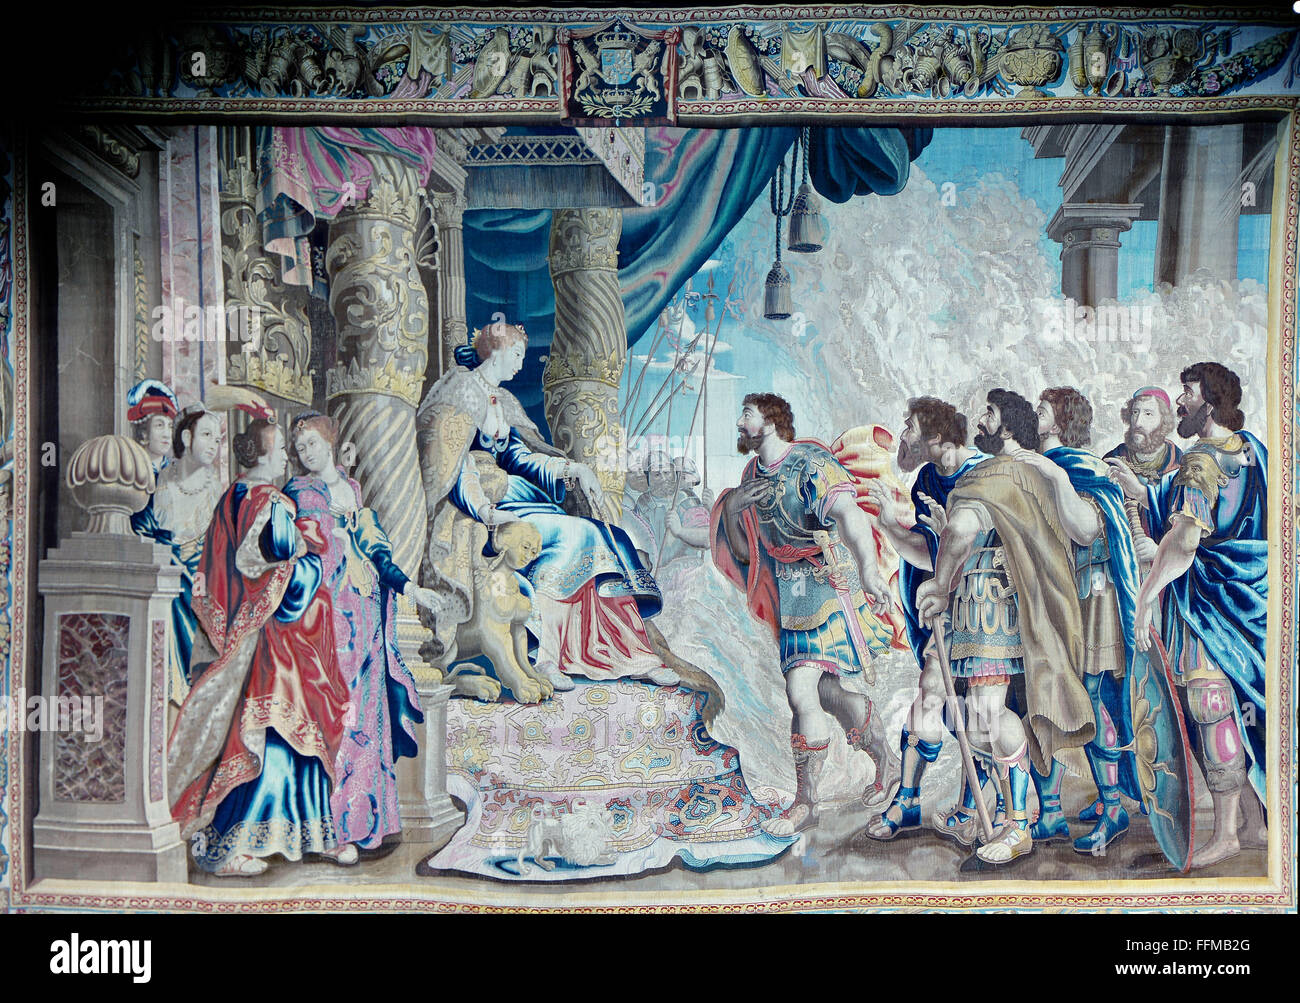 Aeneas, Greek legendary figure, full length, meeting queen Dido of Carthage, tapestry, Bruxelles, first half 17th century, Swedish treasury, Stockholm castle, Stock Photo